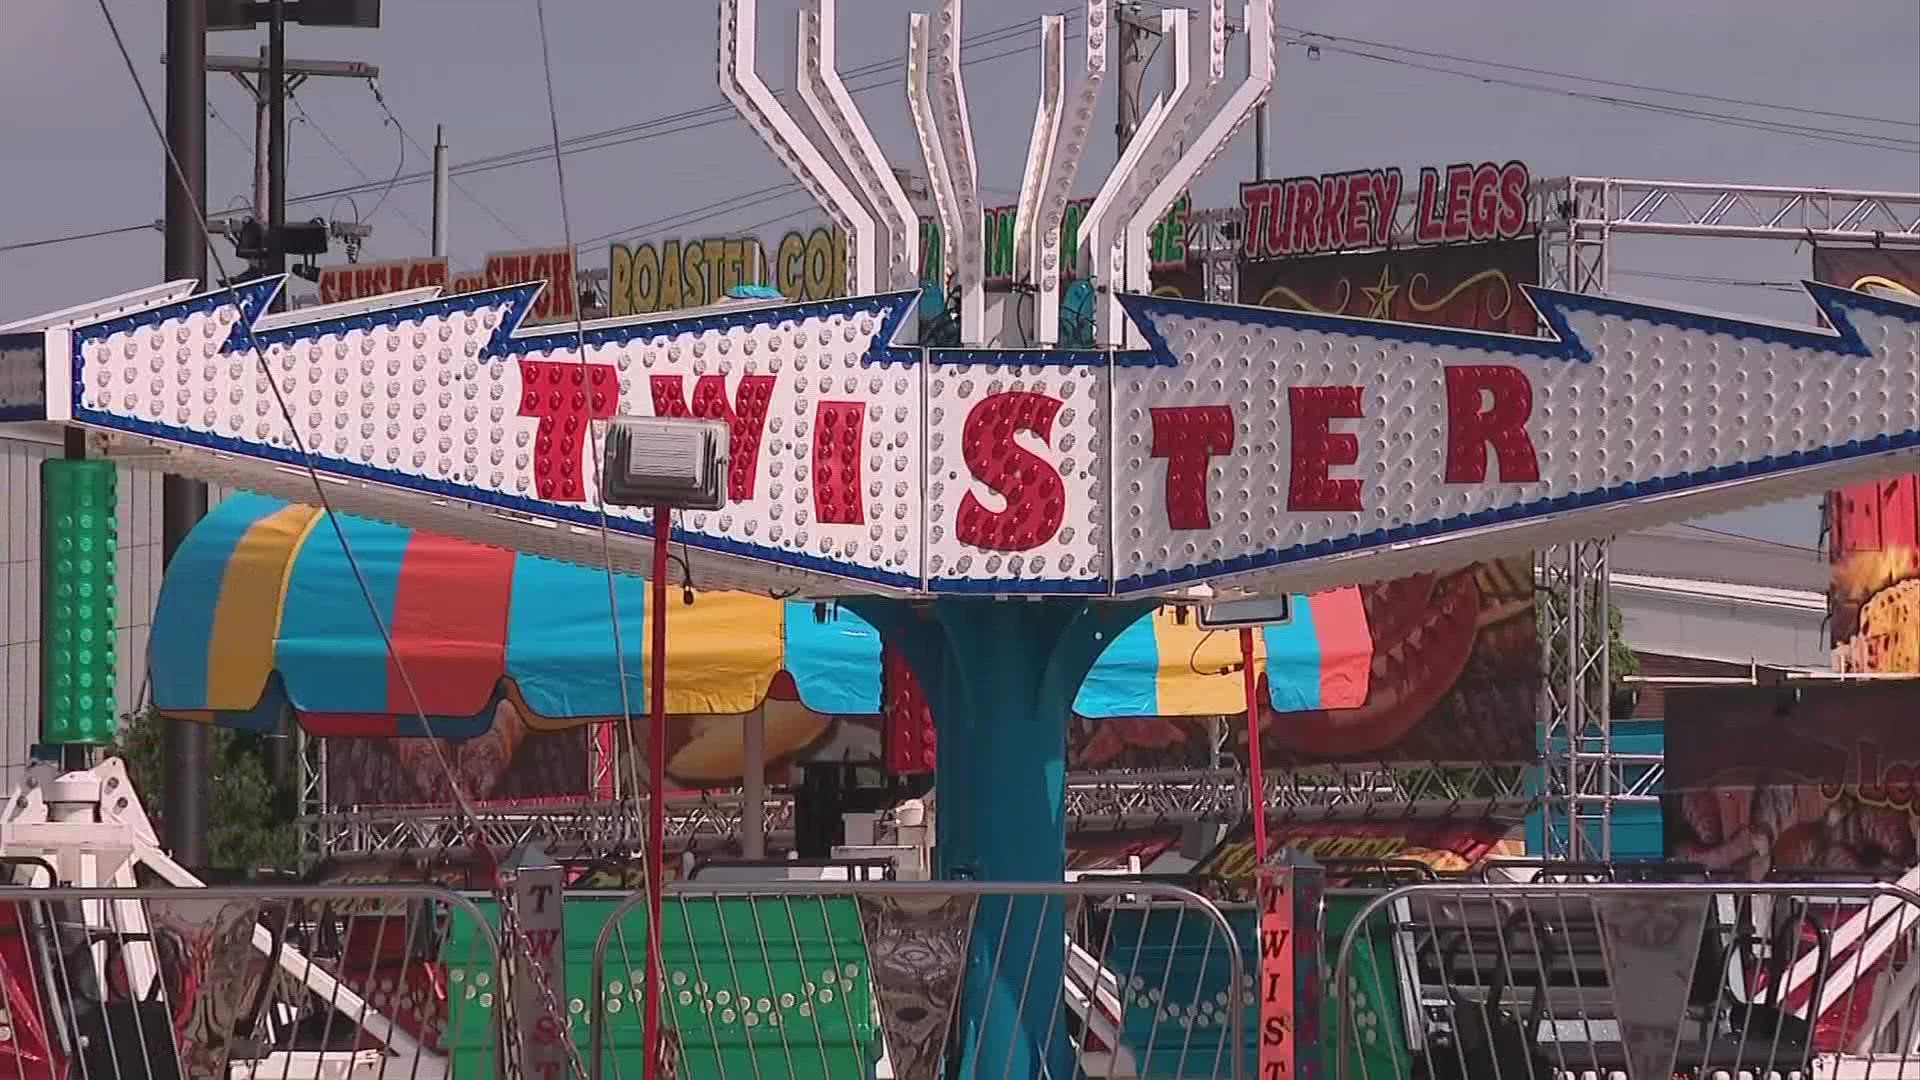 Ohio State Fair returns with new safety requirements